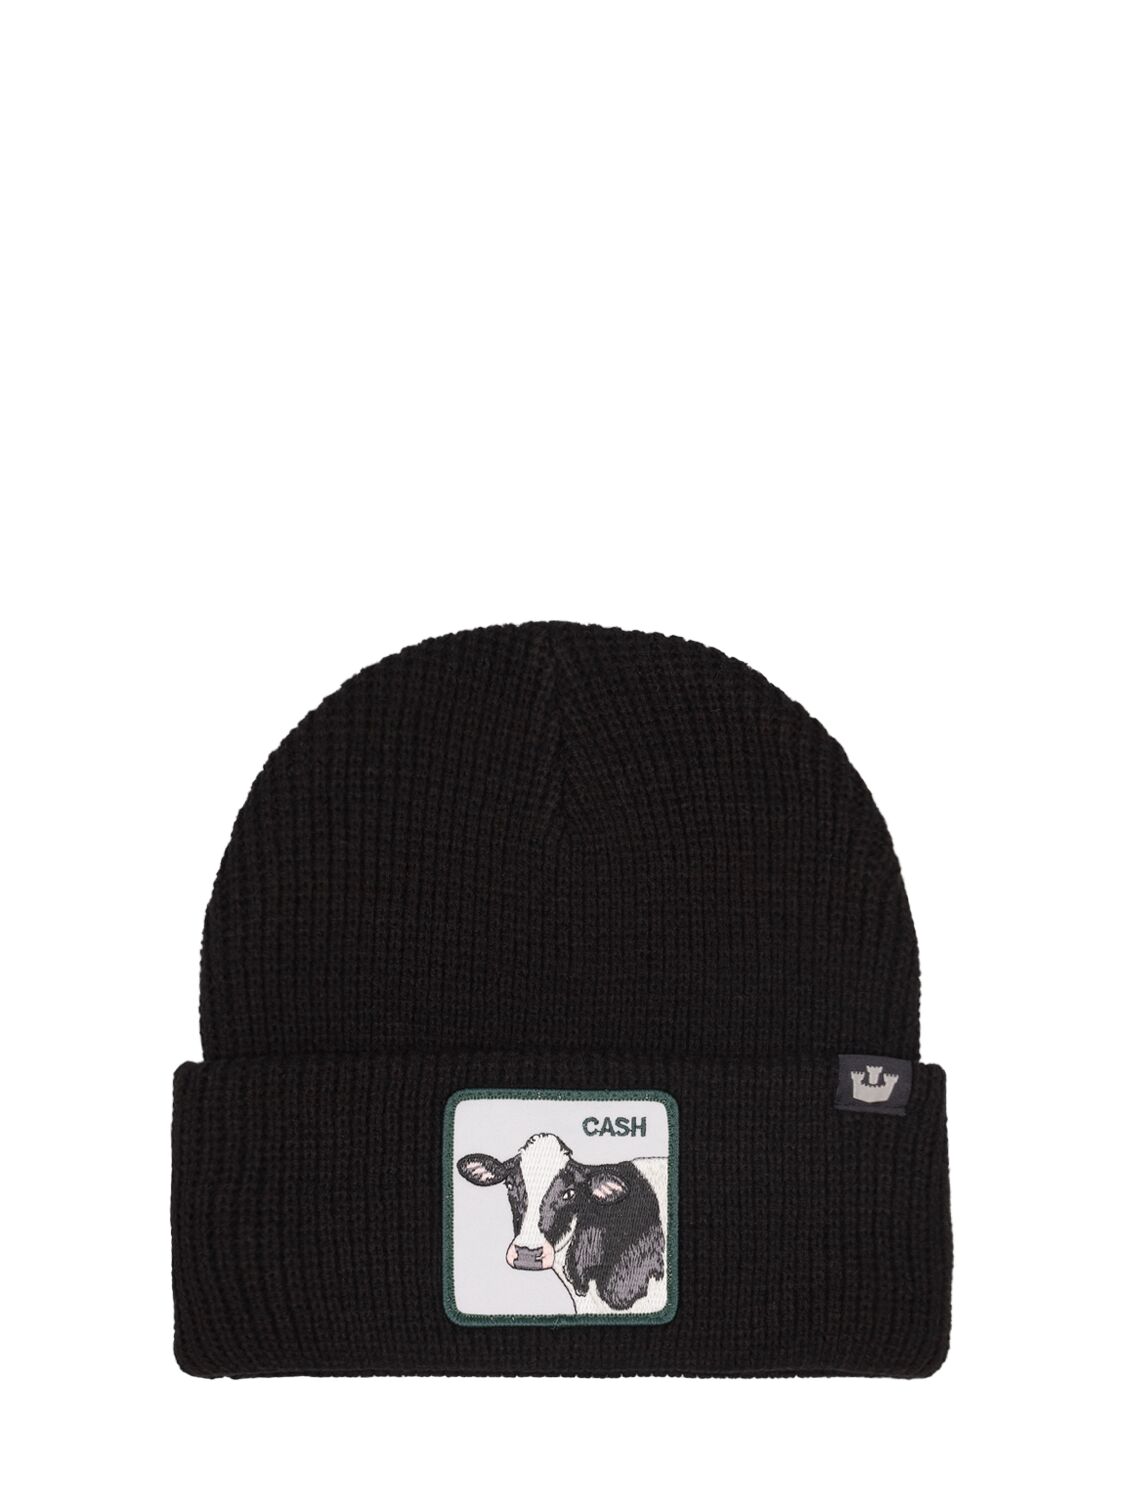 Image of Milk Bands Knit Beanie